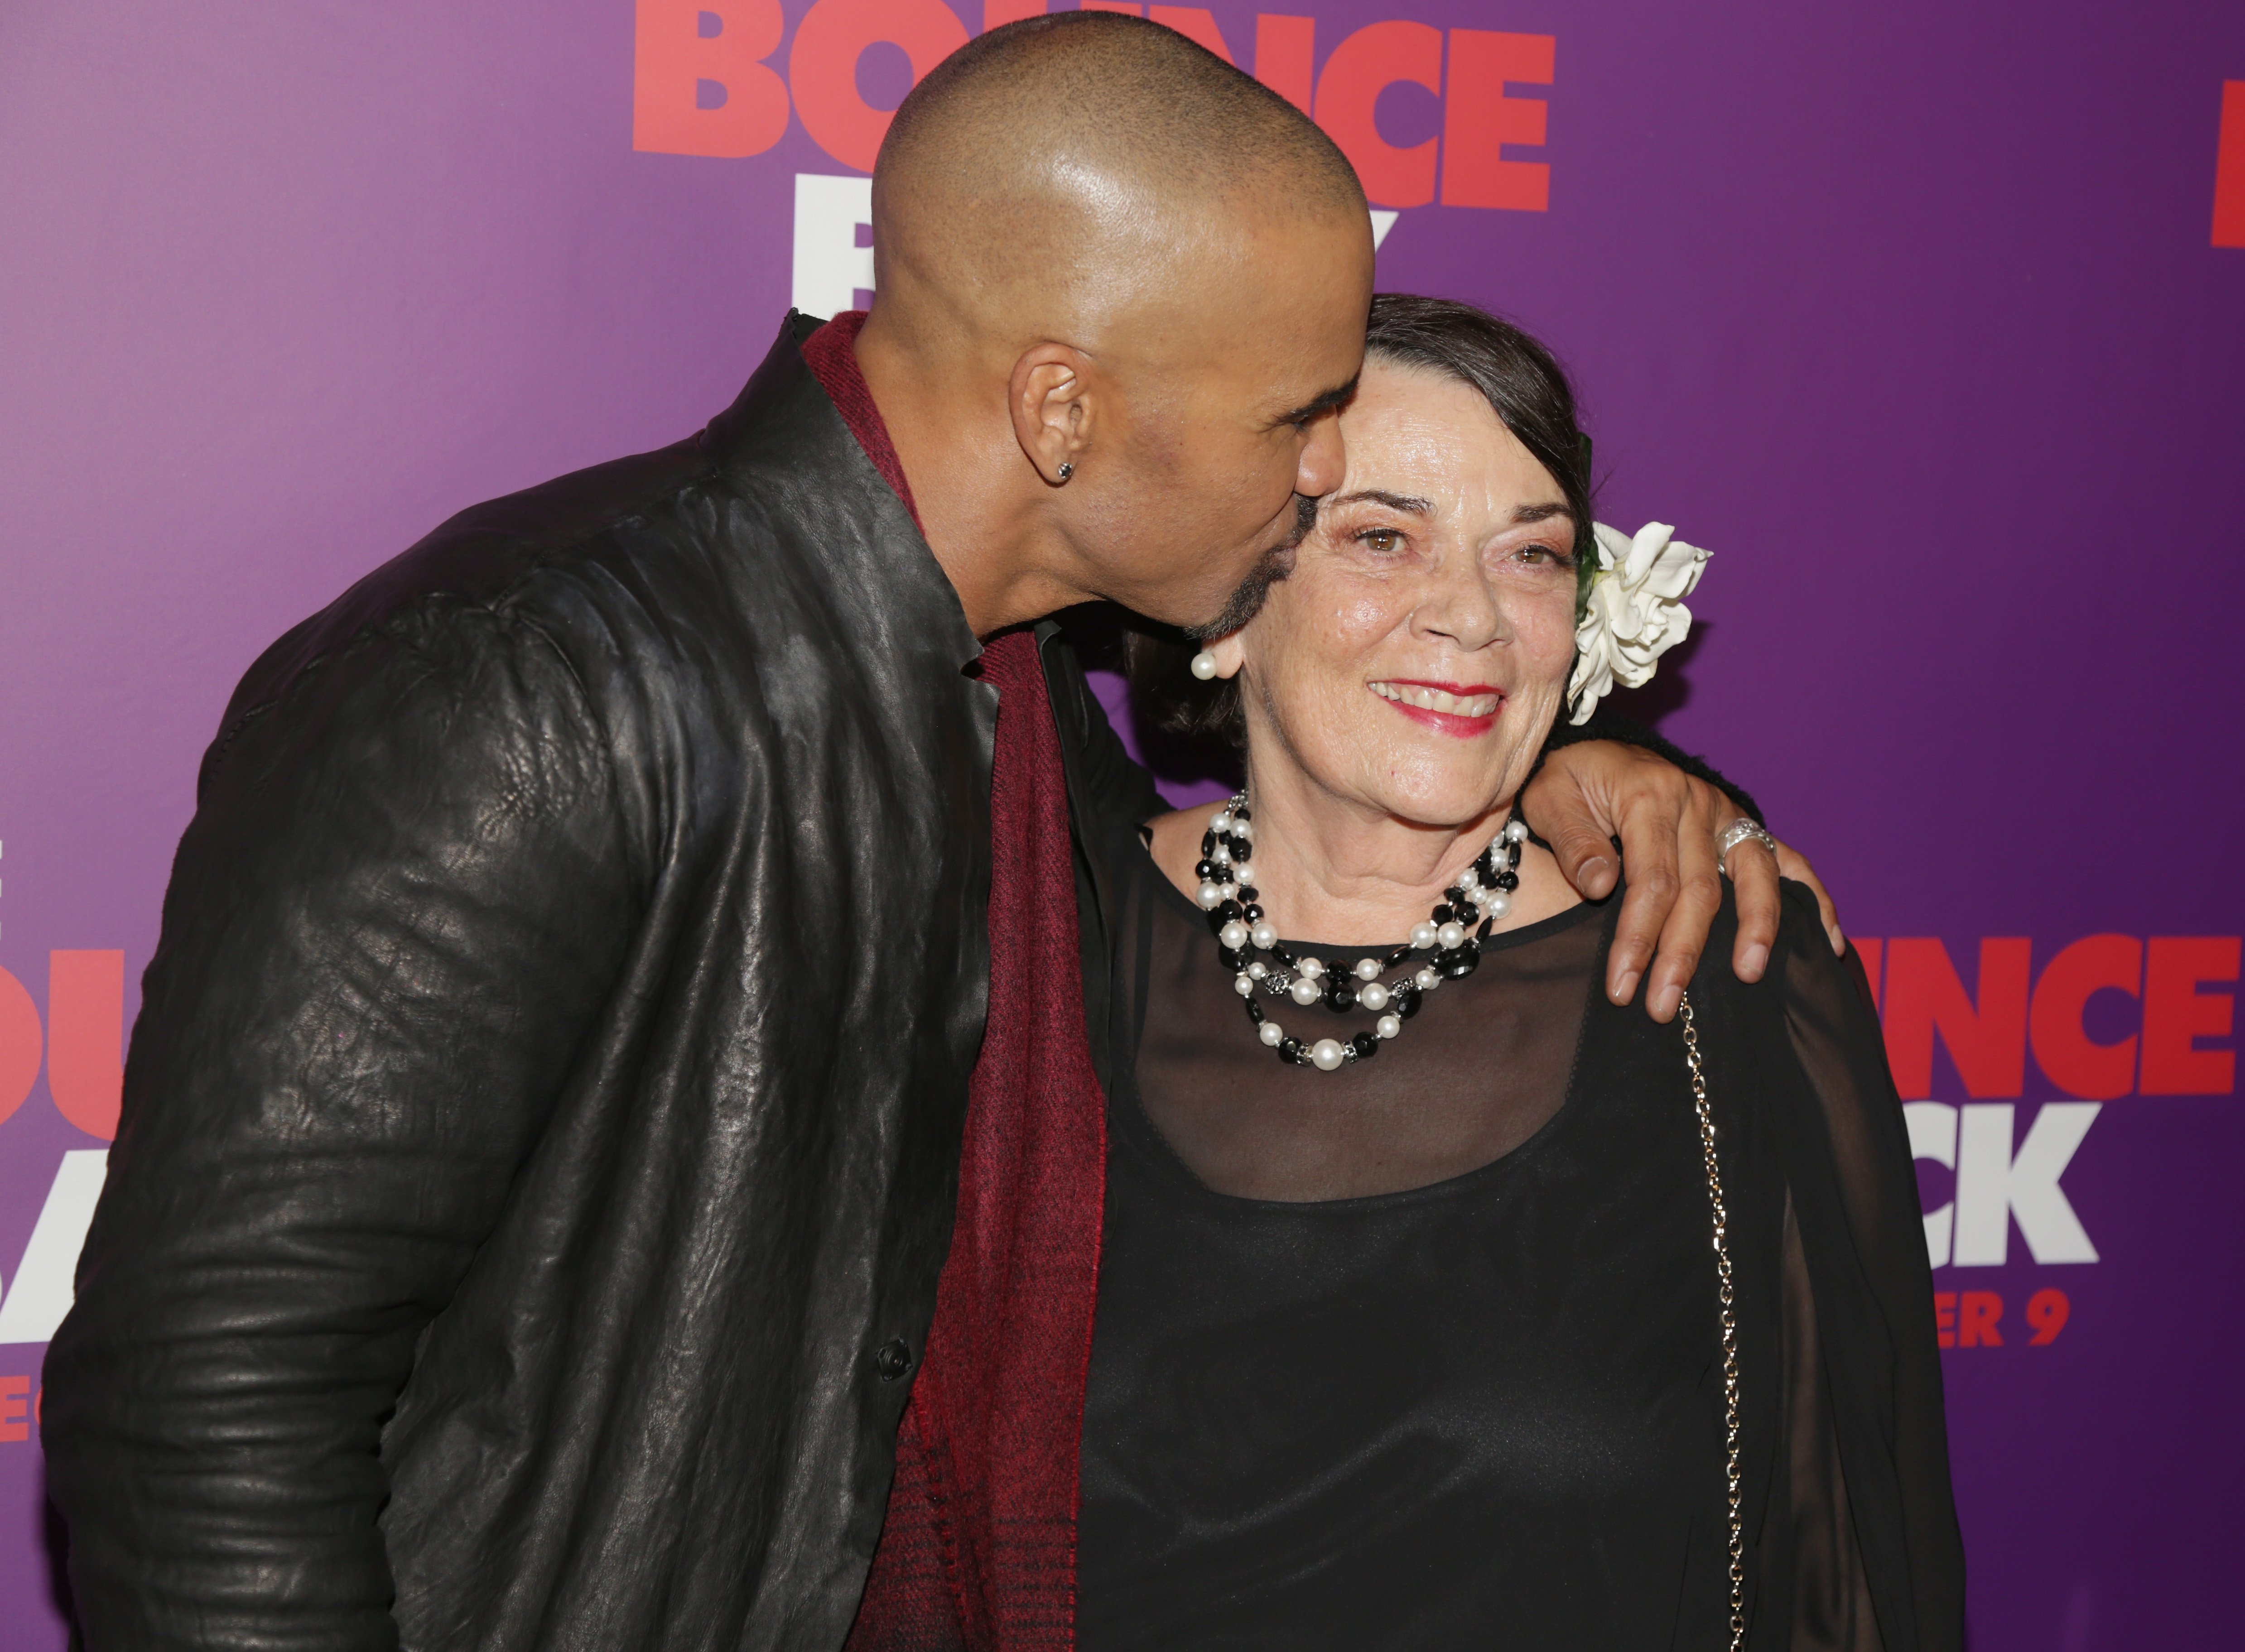 Shemar Moore and Marilyn Wilson at the "The Bounce Back" premiere at TCL Chinese Theatre in Hollywood, CA, on December 6, 2016. | Source: Getty Images